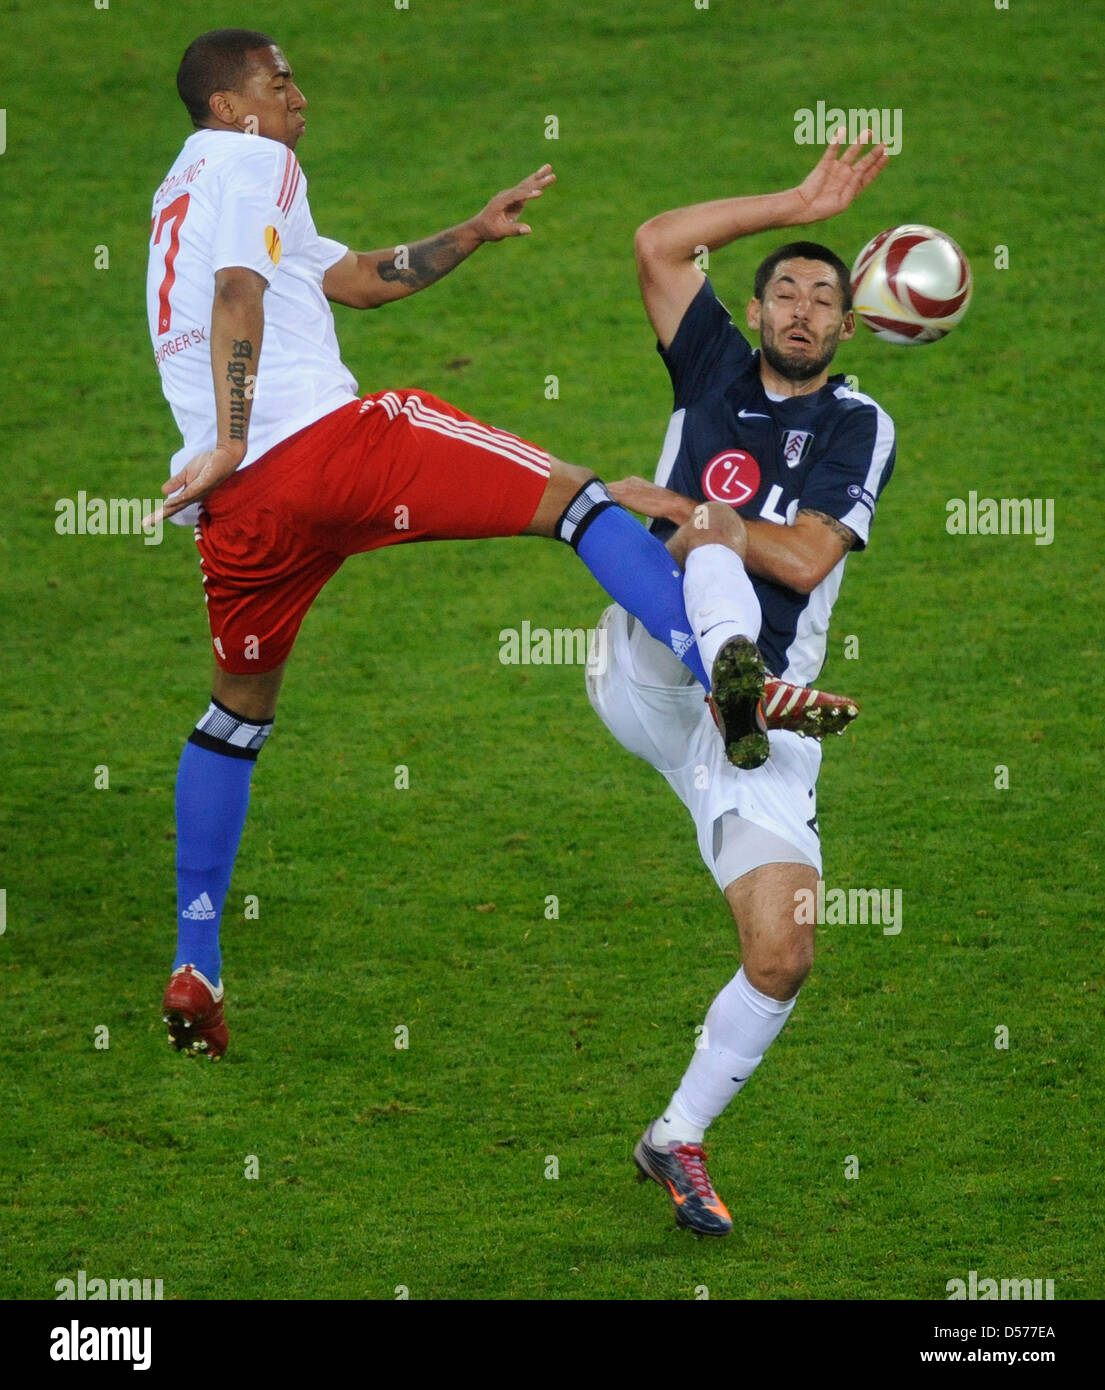 Hamburg's Jerome Boateng (L) and Fulham's Clint Dempsey vie for the ball during the UEFA Europa League semi-final first leg match SV Hamburg vs Fulham FC at Hamburg Arena stadium in Hamburg, Germany, 22 April 2010. The match ended in a 0-0 tie. Photo: FABIAN BIMMER Stock Photo